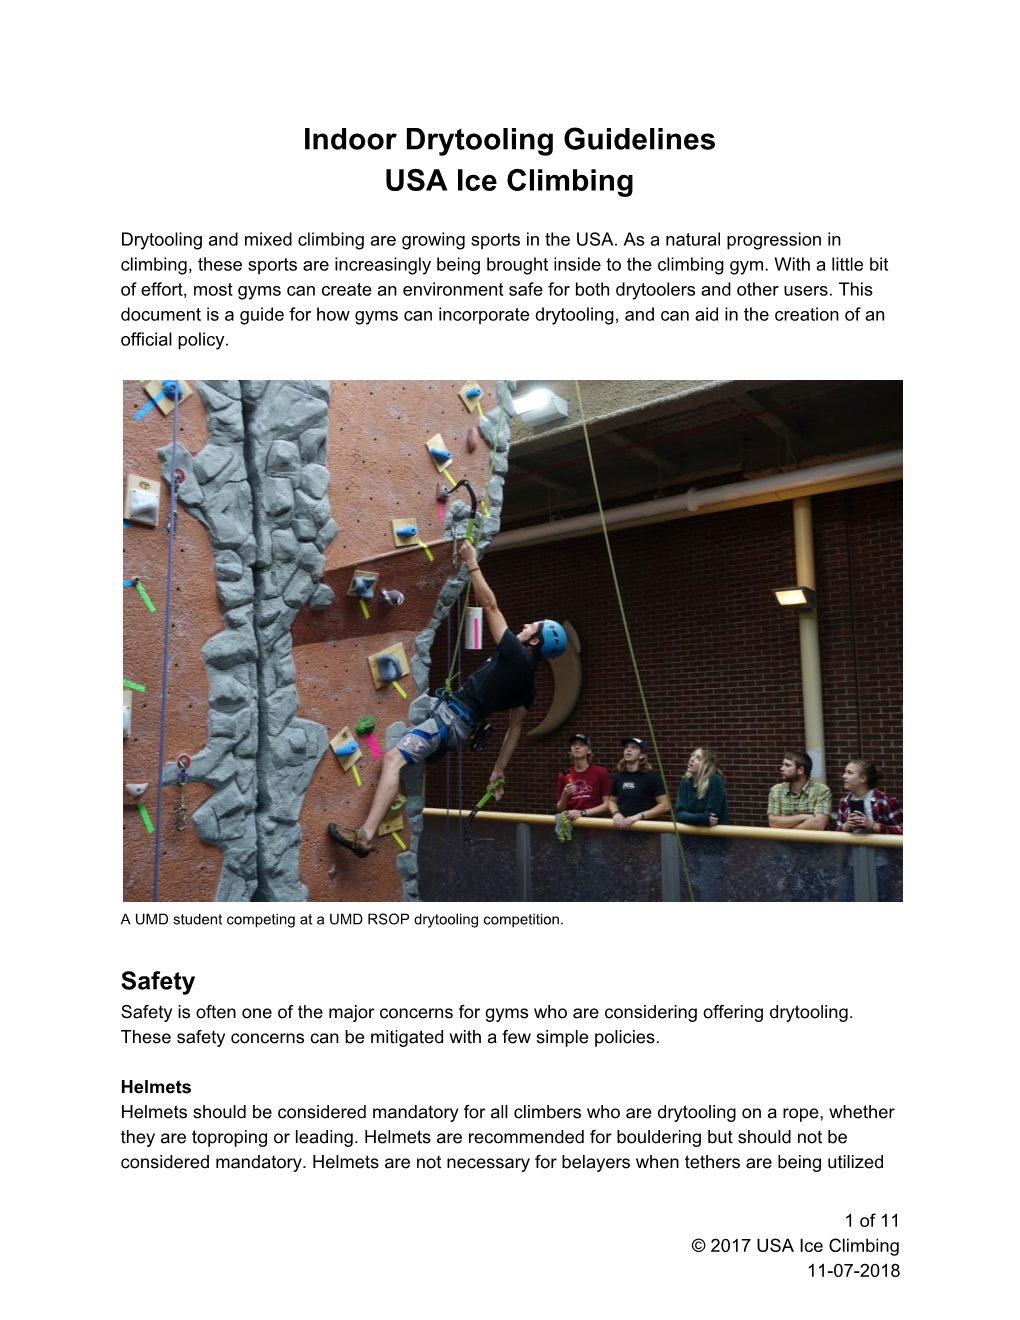 Indoor Drytooling Guidelines USA Ice Climbing